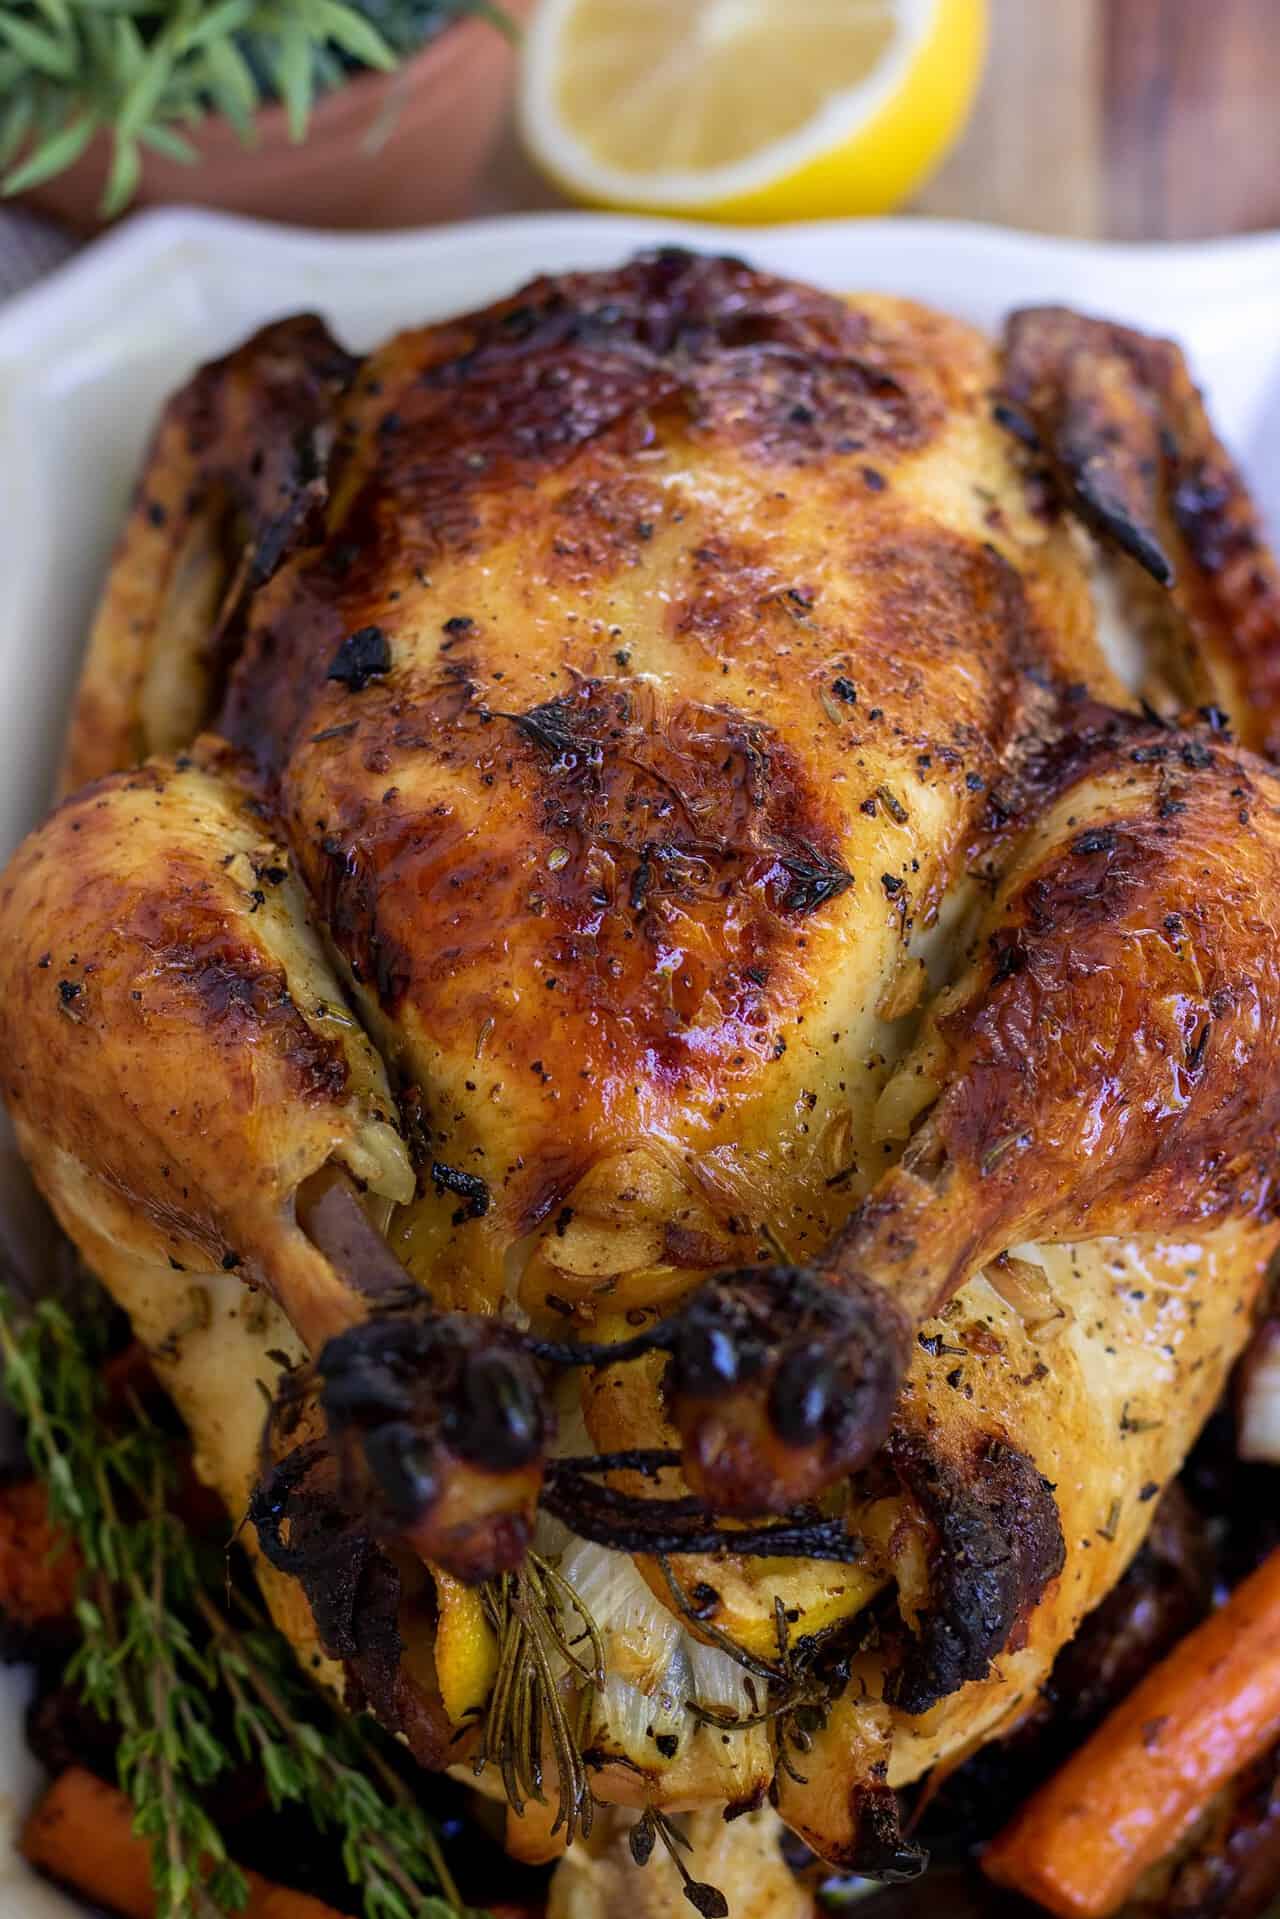 A whole chicken that's been roasted until golden and browned. The skin looks crispy and browned. There's fresh sage and a half of a lemon in the background.